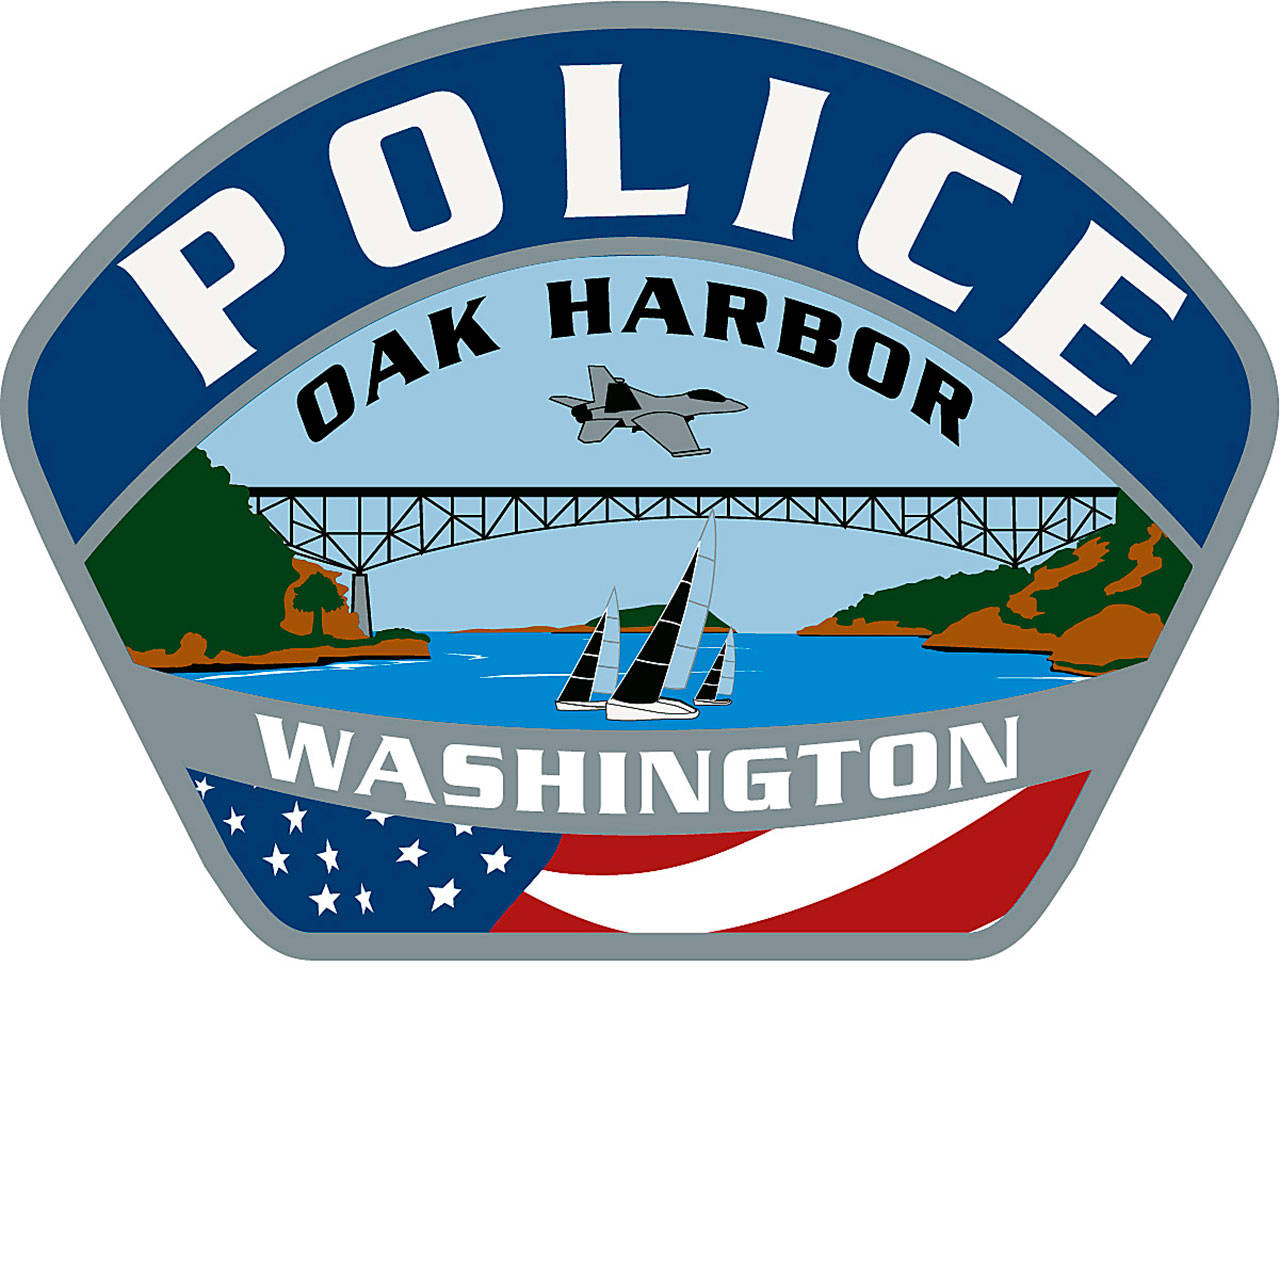 Photo provided. The new design for the Oak Harbor Police Department badge and shoulder patch includes a Navy jet, Deception Pass Bridge and a sailboat.